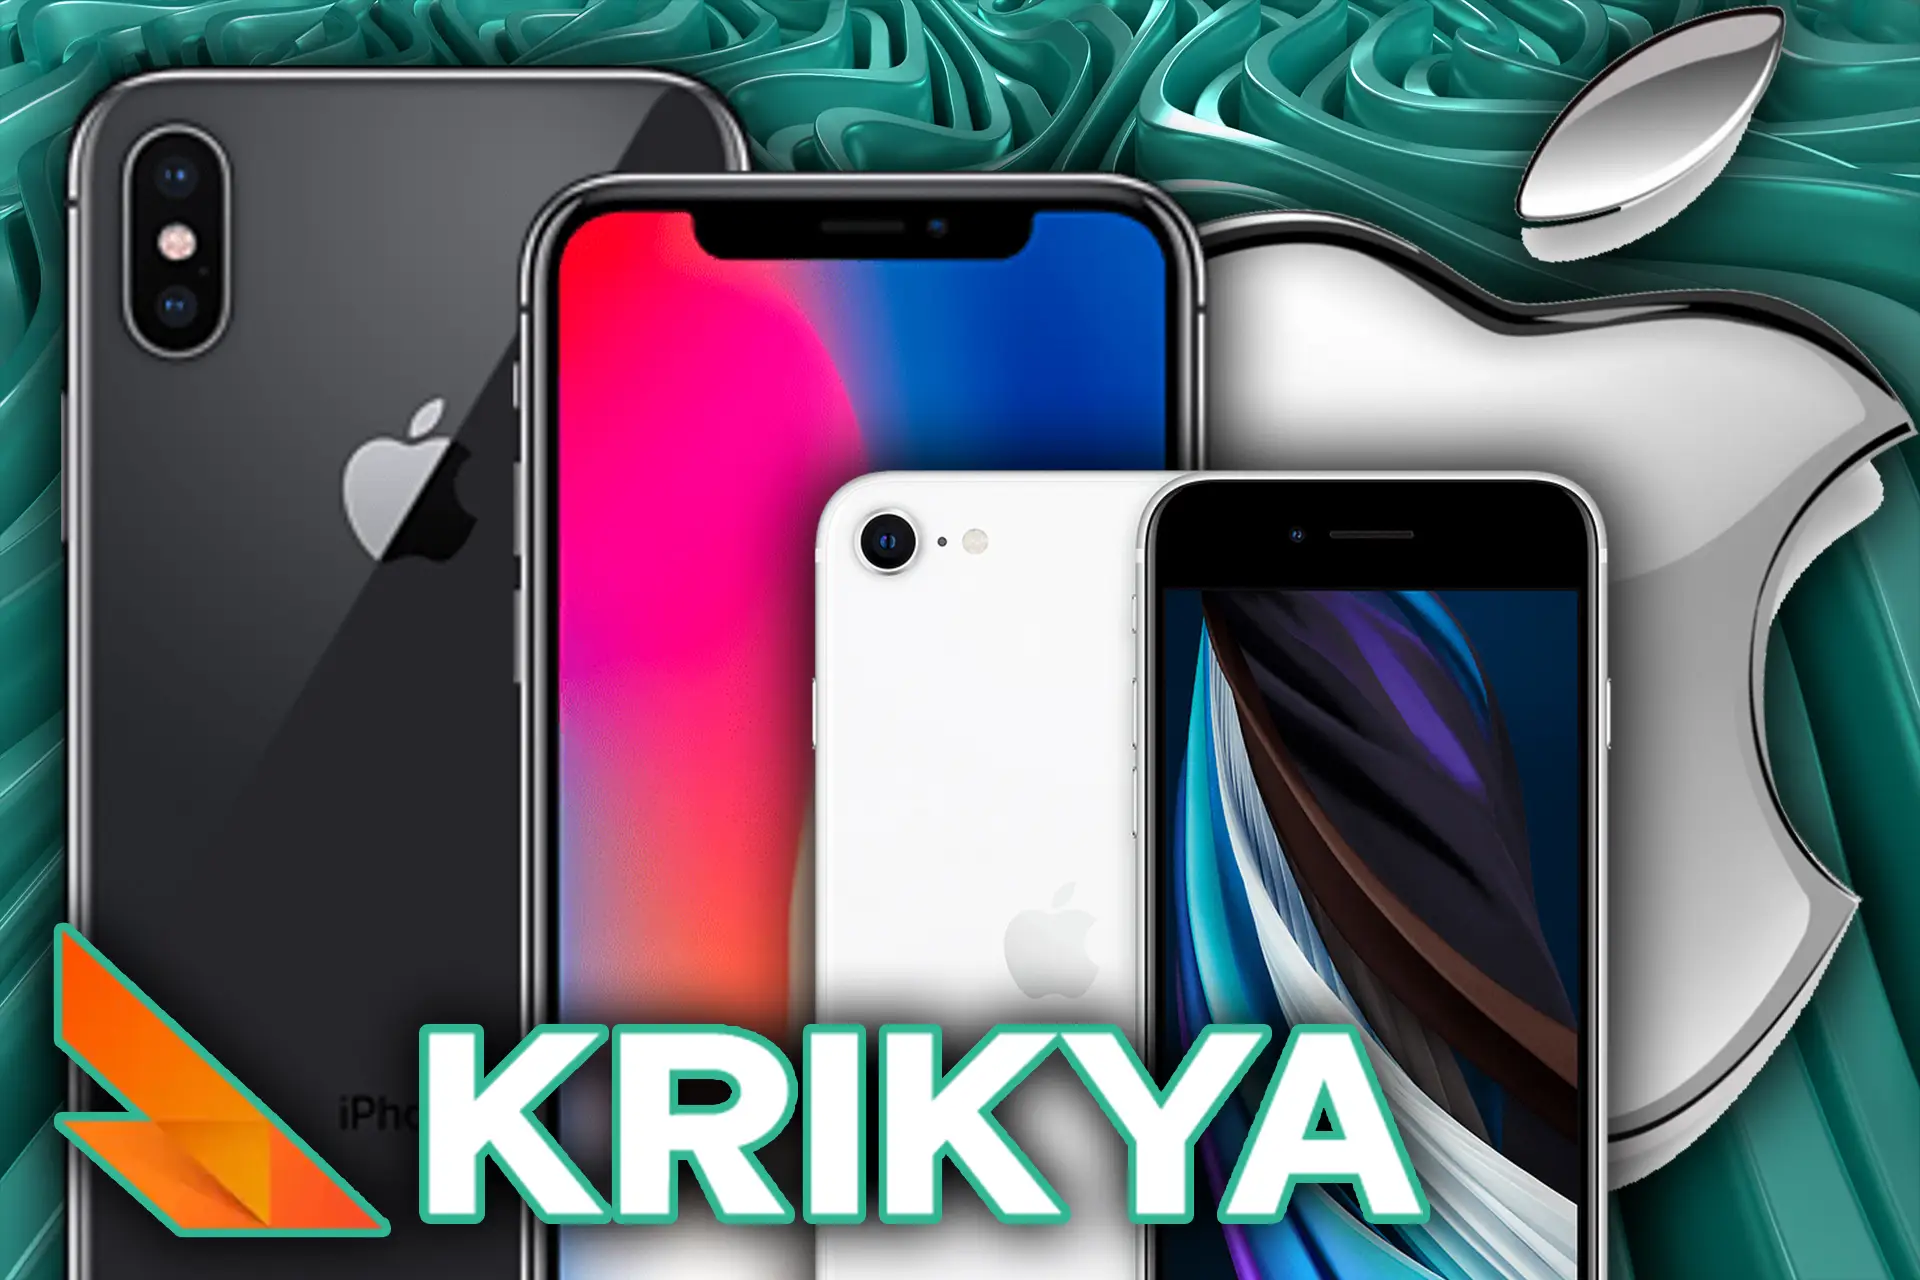 Every modern iPhone, younger ther 5s, can operate the Krikya app.